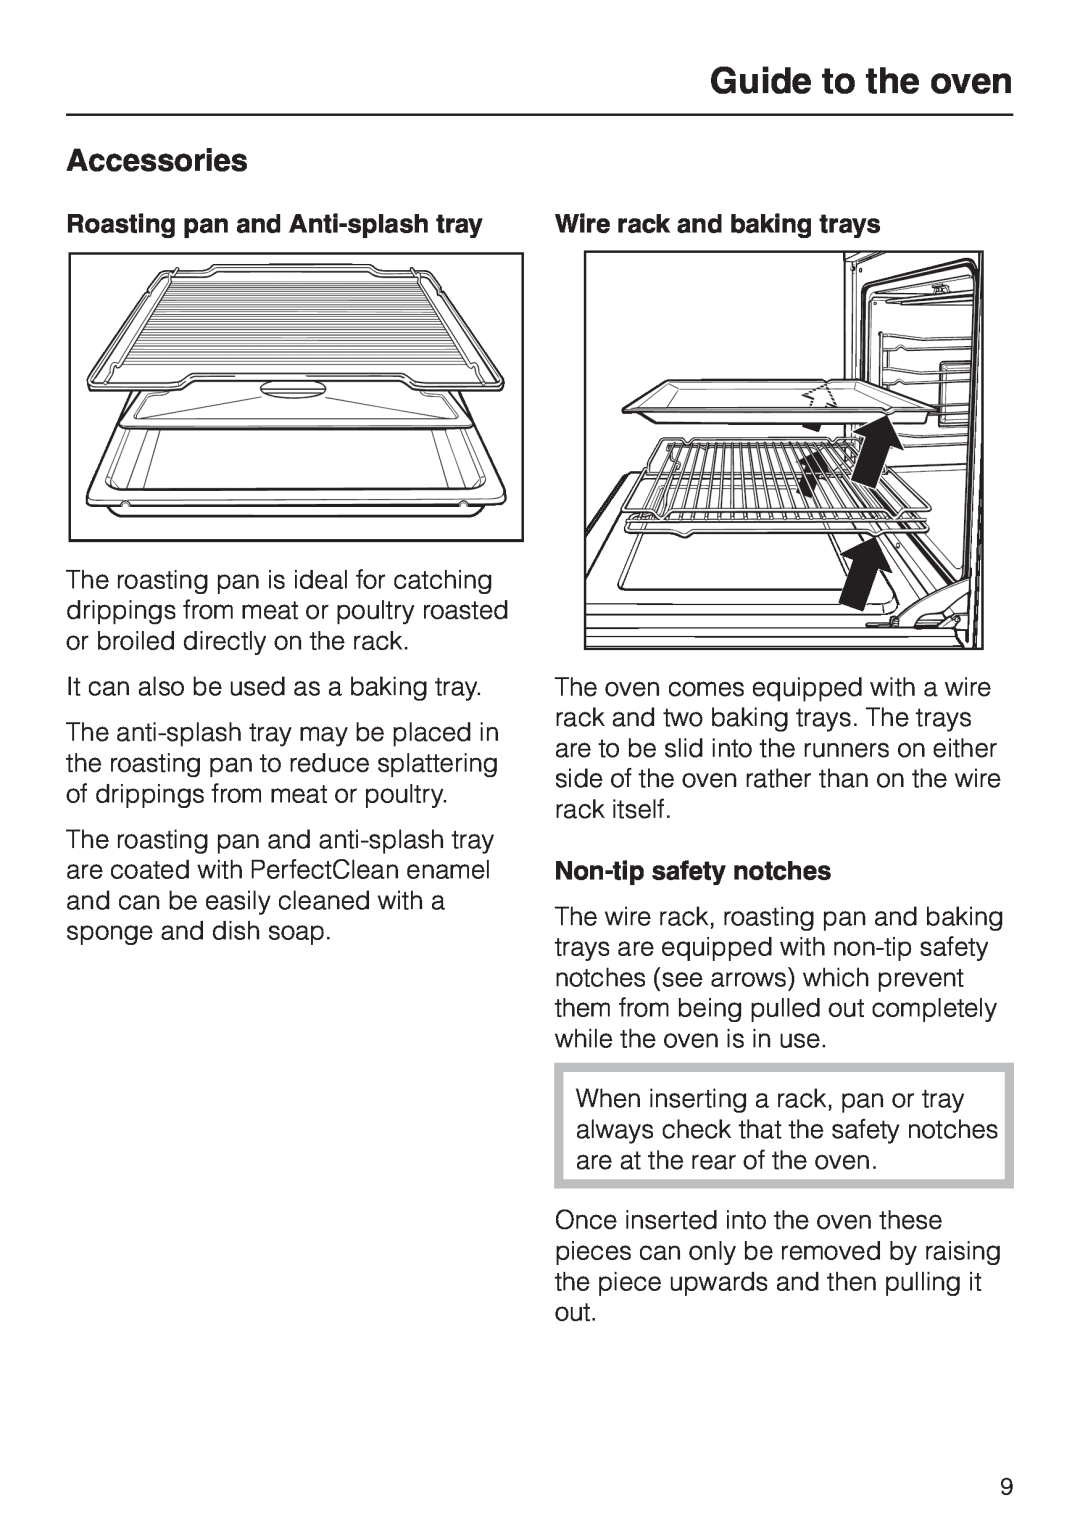 Miele H 387-1 BP KAT manual Accessories, Guide to the oven, Roasting pan and Anti-splashtray, Non-tipsafety notches 